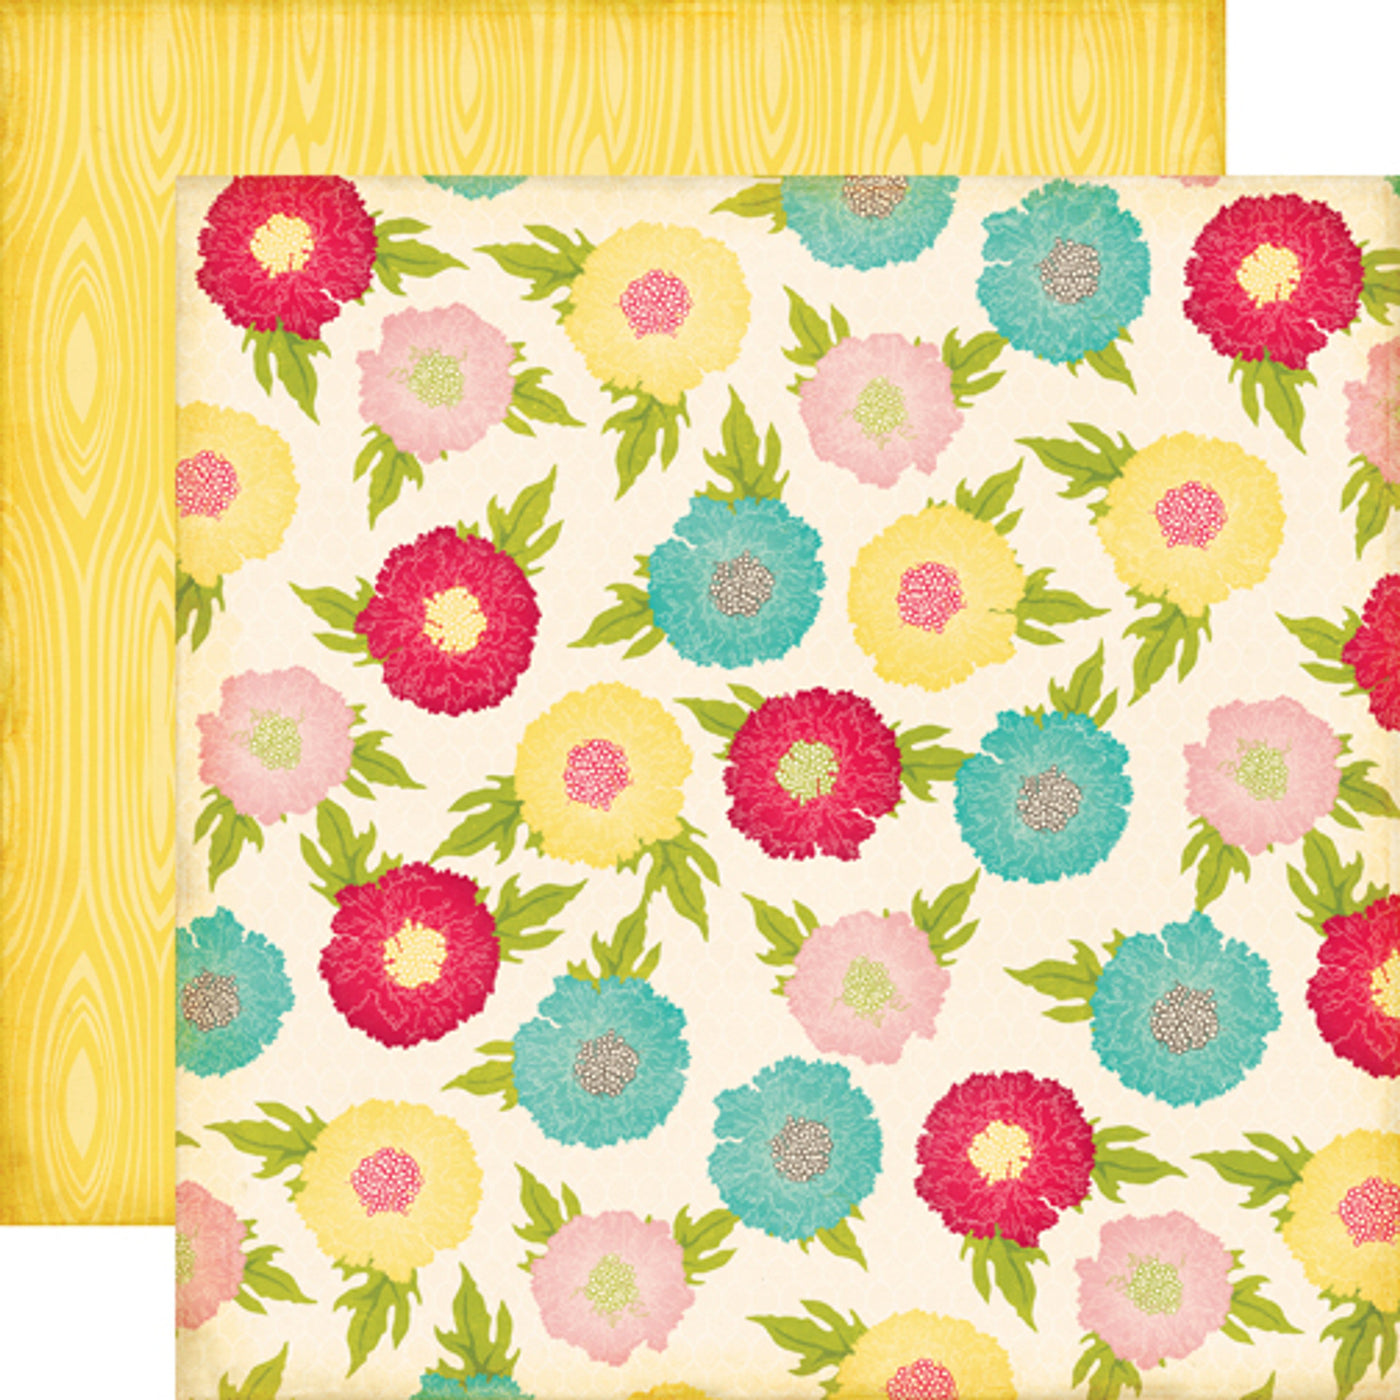 12x12 double-sided patterned paper. (Side A - red, blue, yellow, and pink floral on a cream background; Side B - yellow woodgrain on a yellow background)